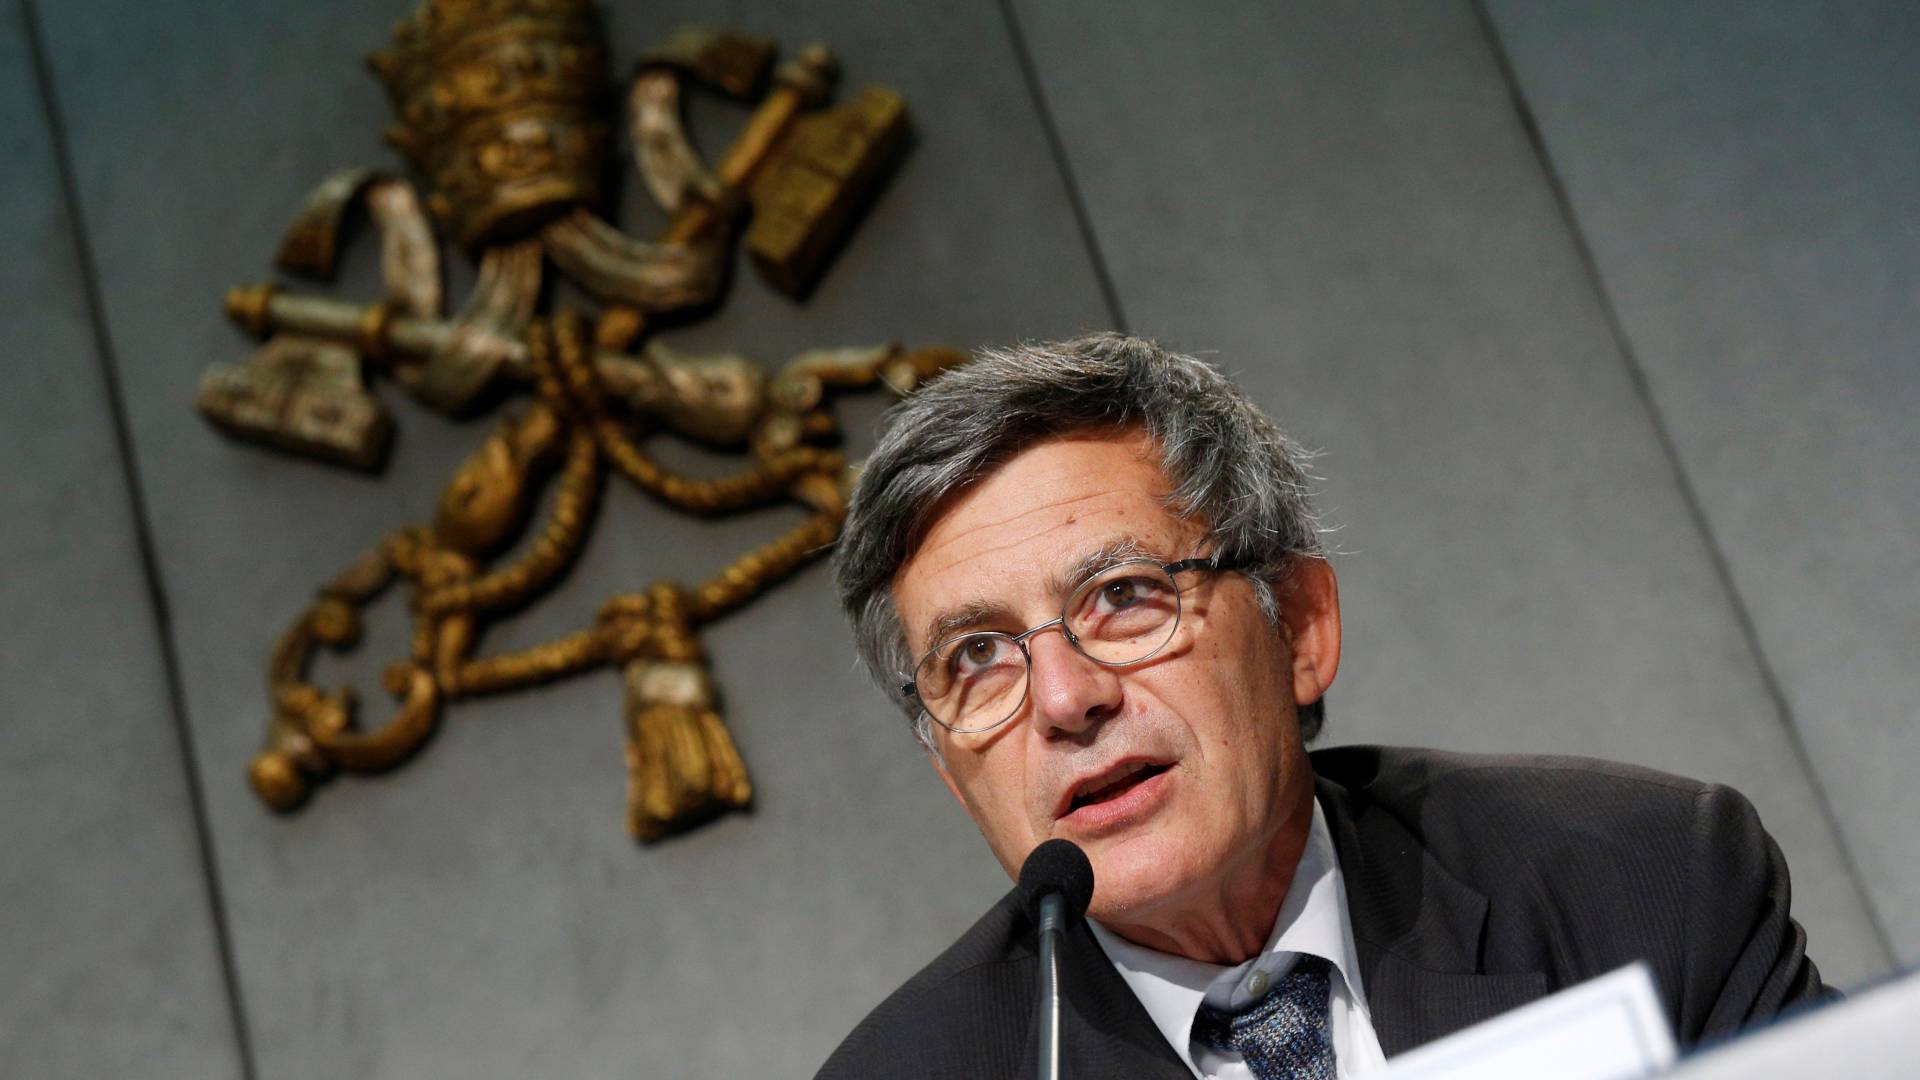 Digital world leaves some ‘hyperconnected and alone,’ Vatican official says